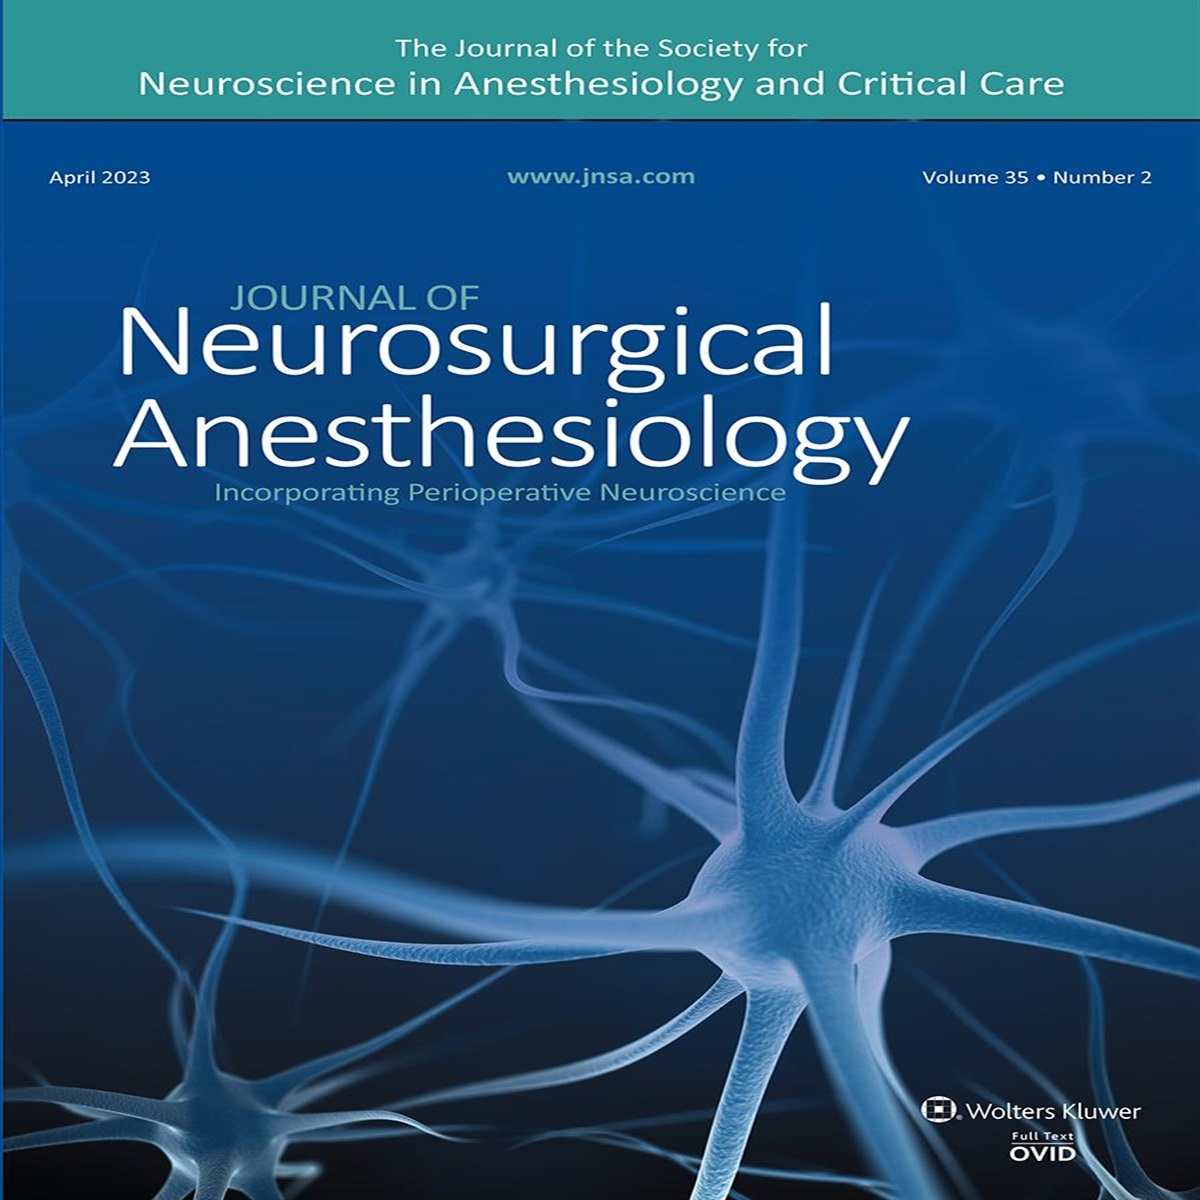 Journal of Neurosurgical Anesthesiology 2022 Reviewer Acknowledgement